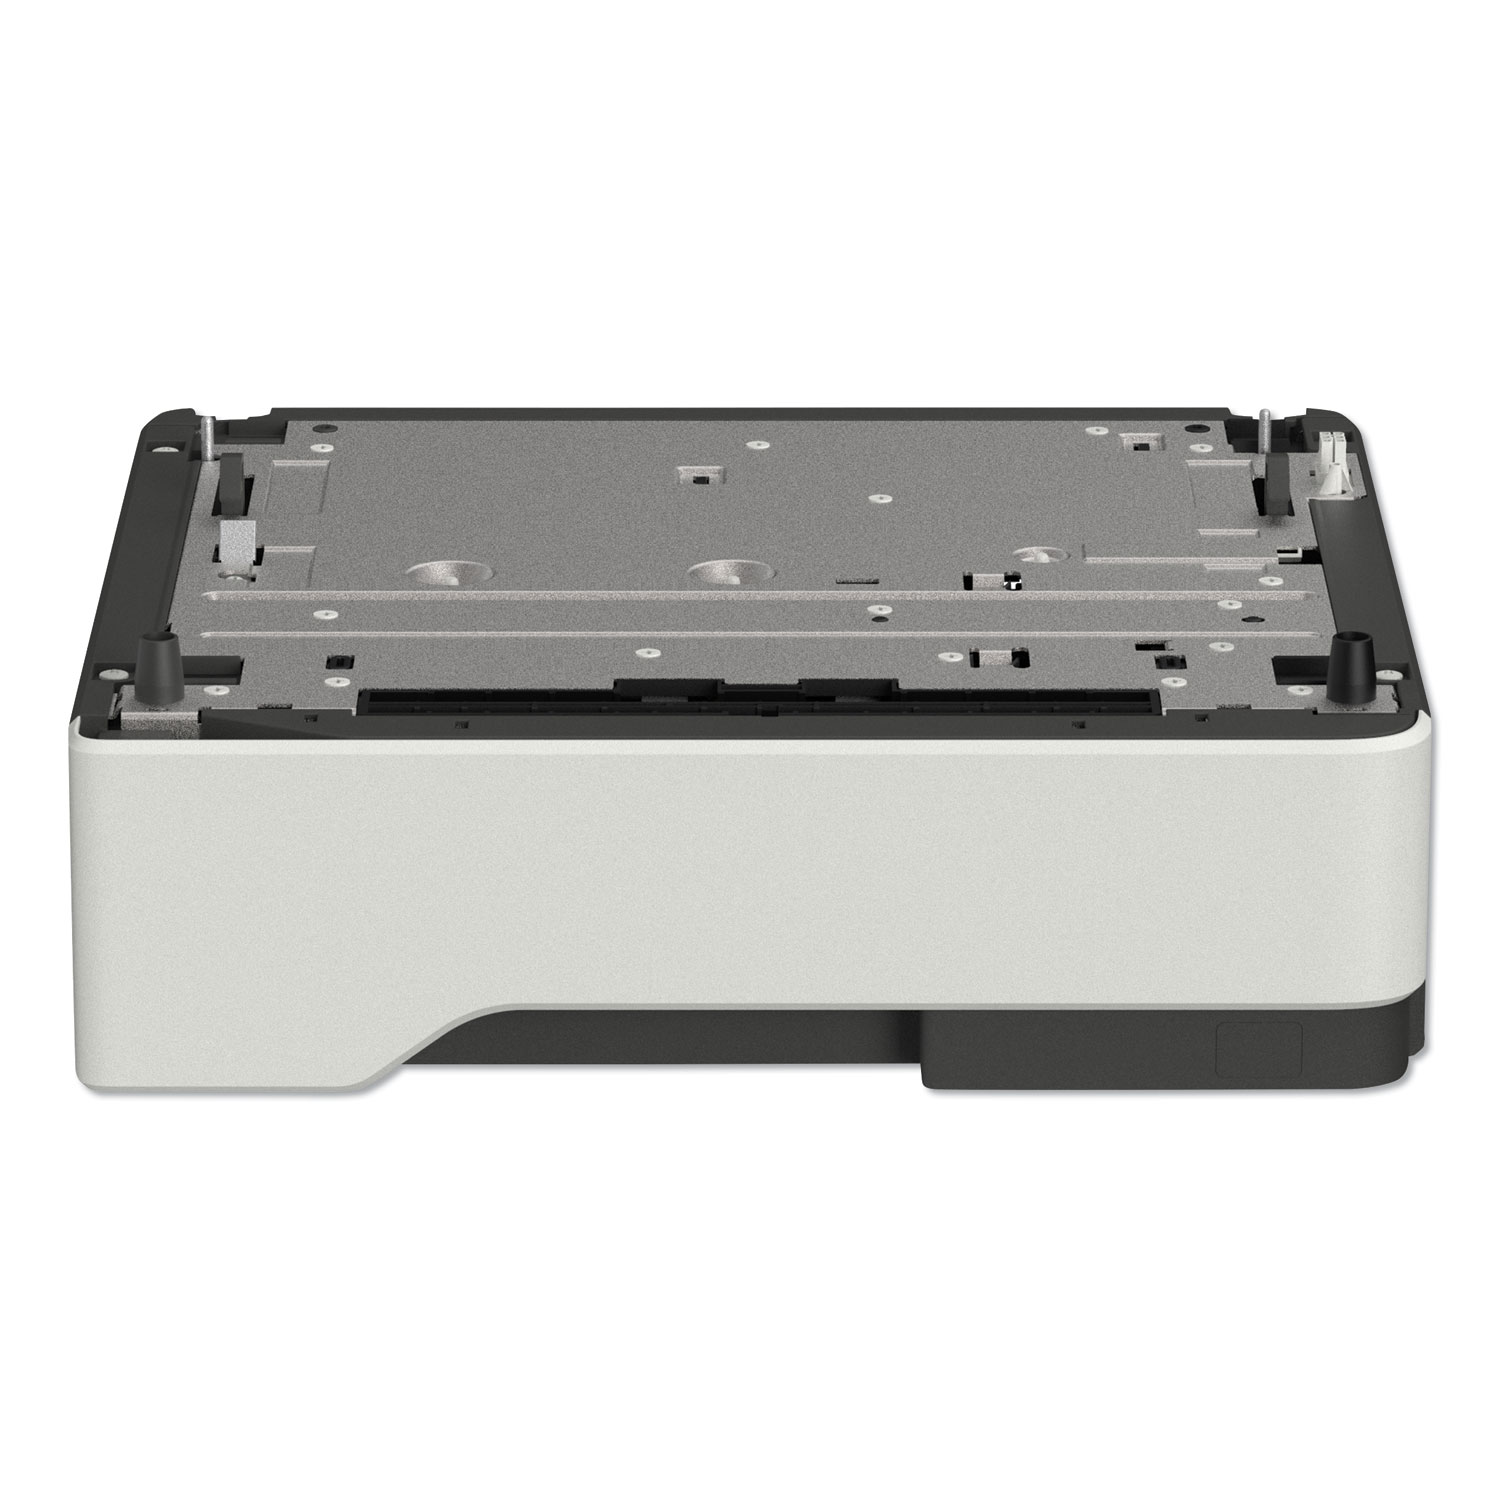  Lexmark 36S3110 36S3110 550-Sheet Paper Tray for MS/MX320-620 Series and SB/MB2300-2600 Series (LEX36S3110) 